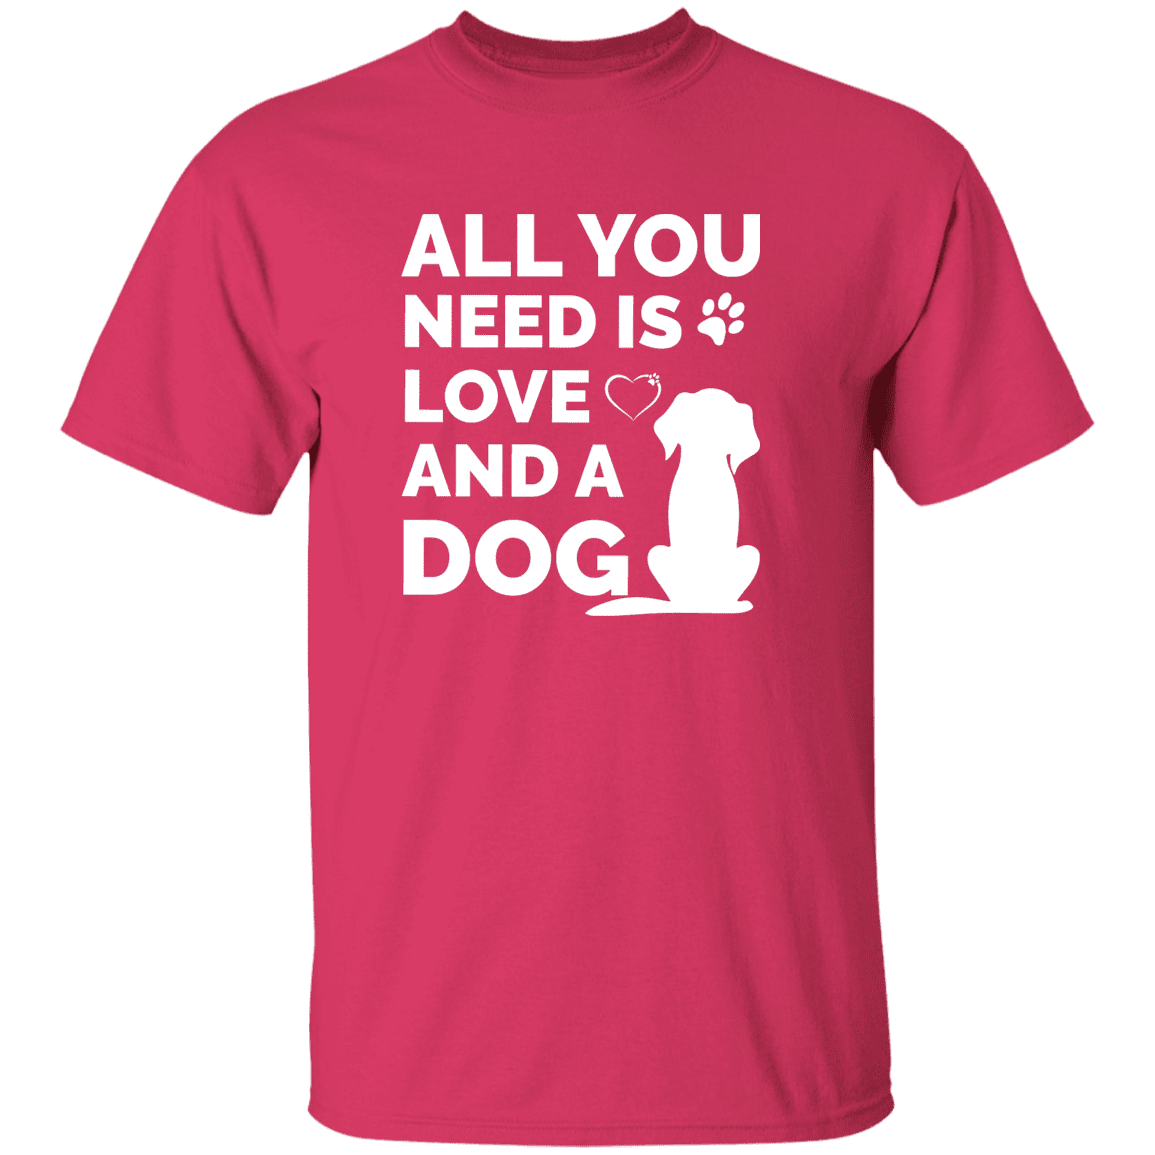 All You Need Is Love And A Dog - T Shirt.